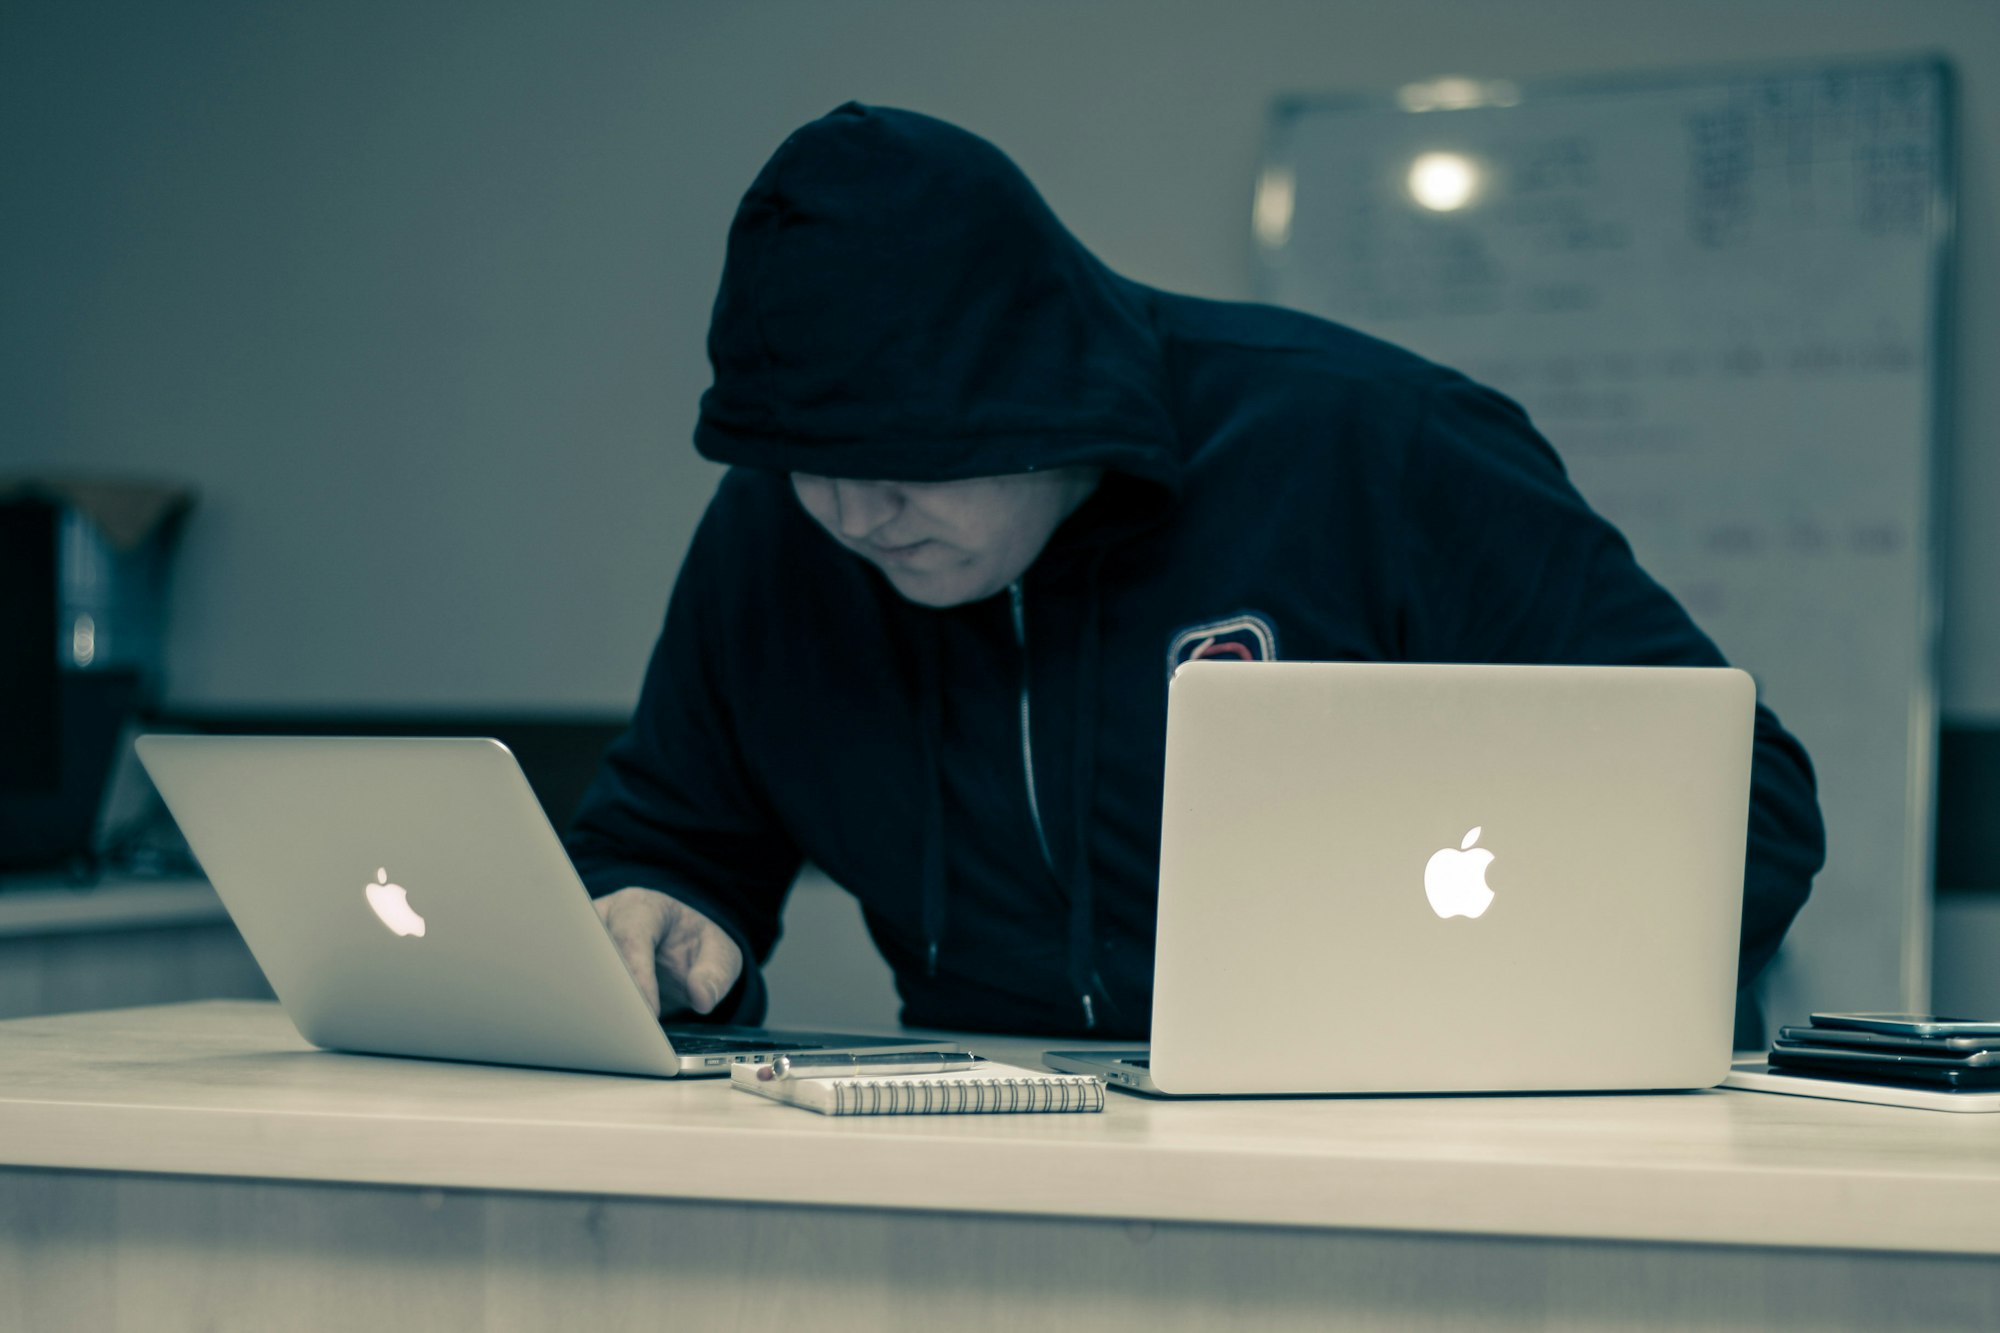 A man covered in hoody with PCs on a desk